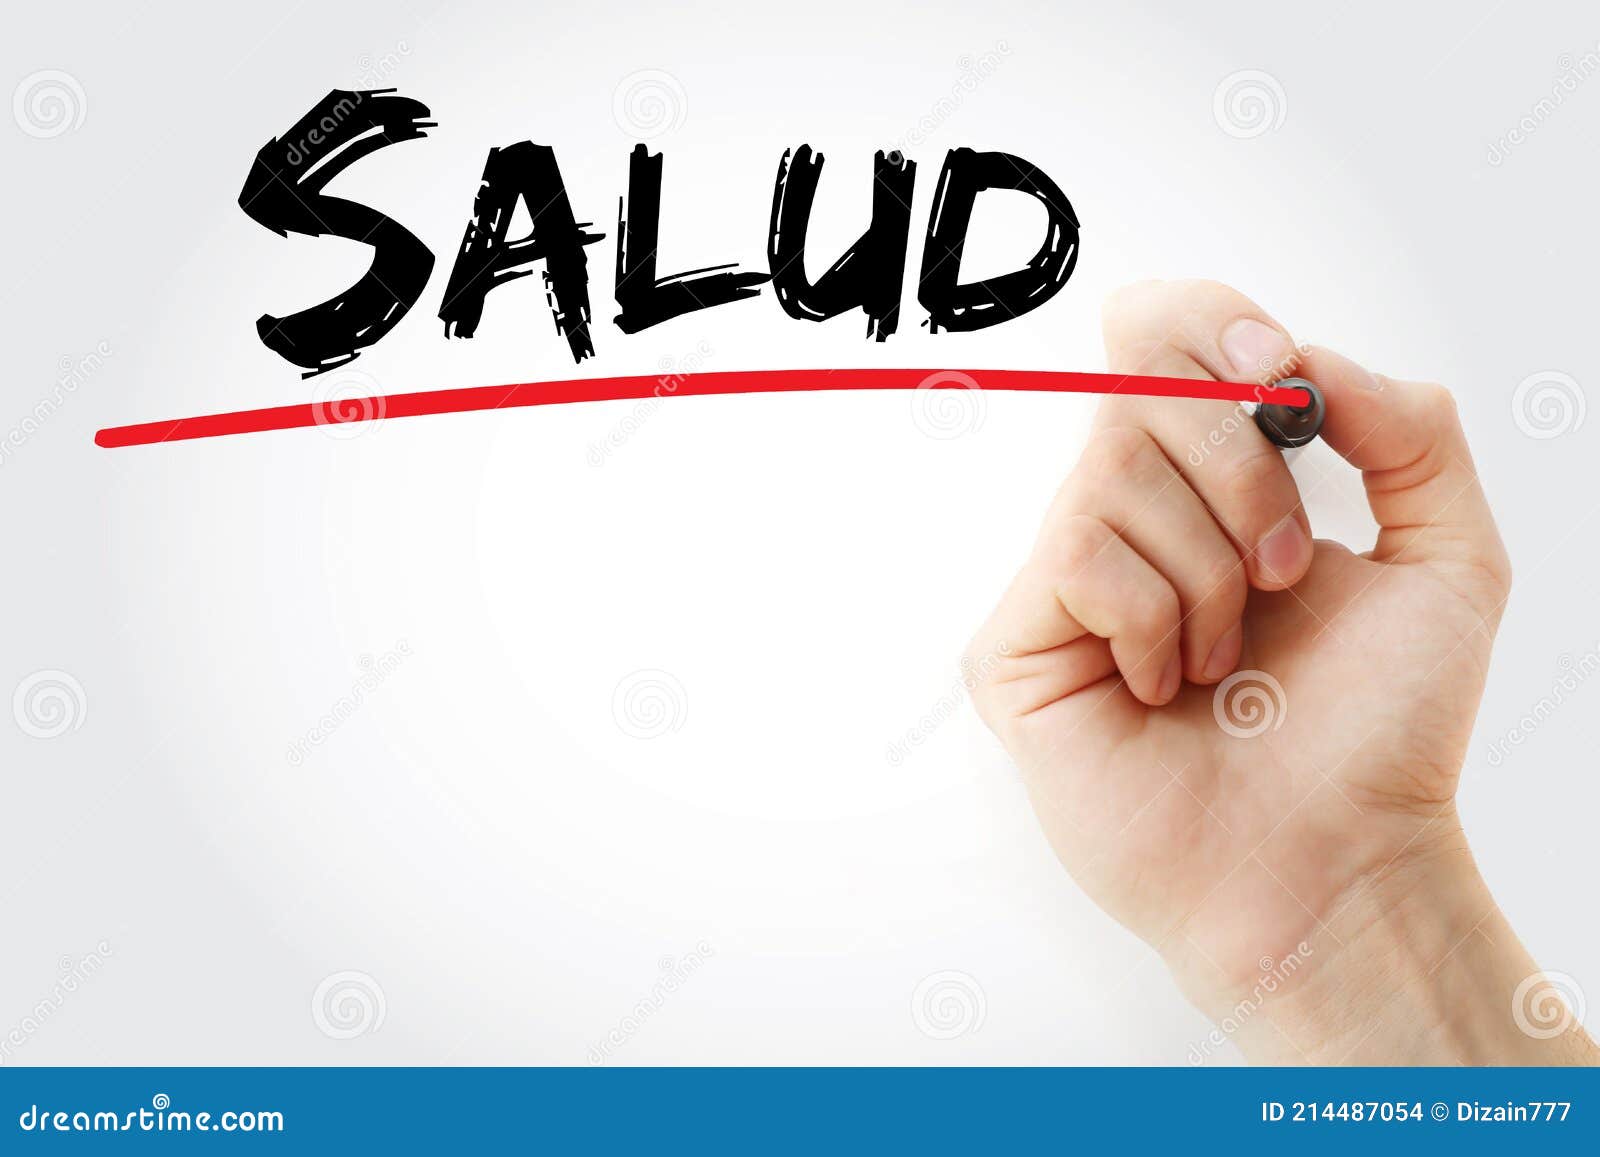 salud health in spanish text with marker, health concept background